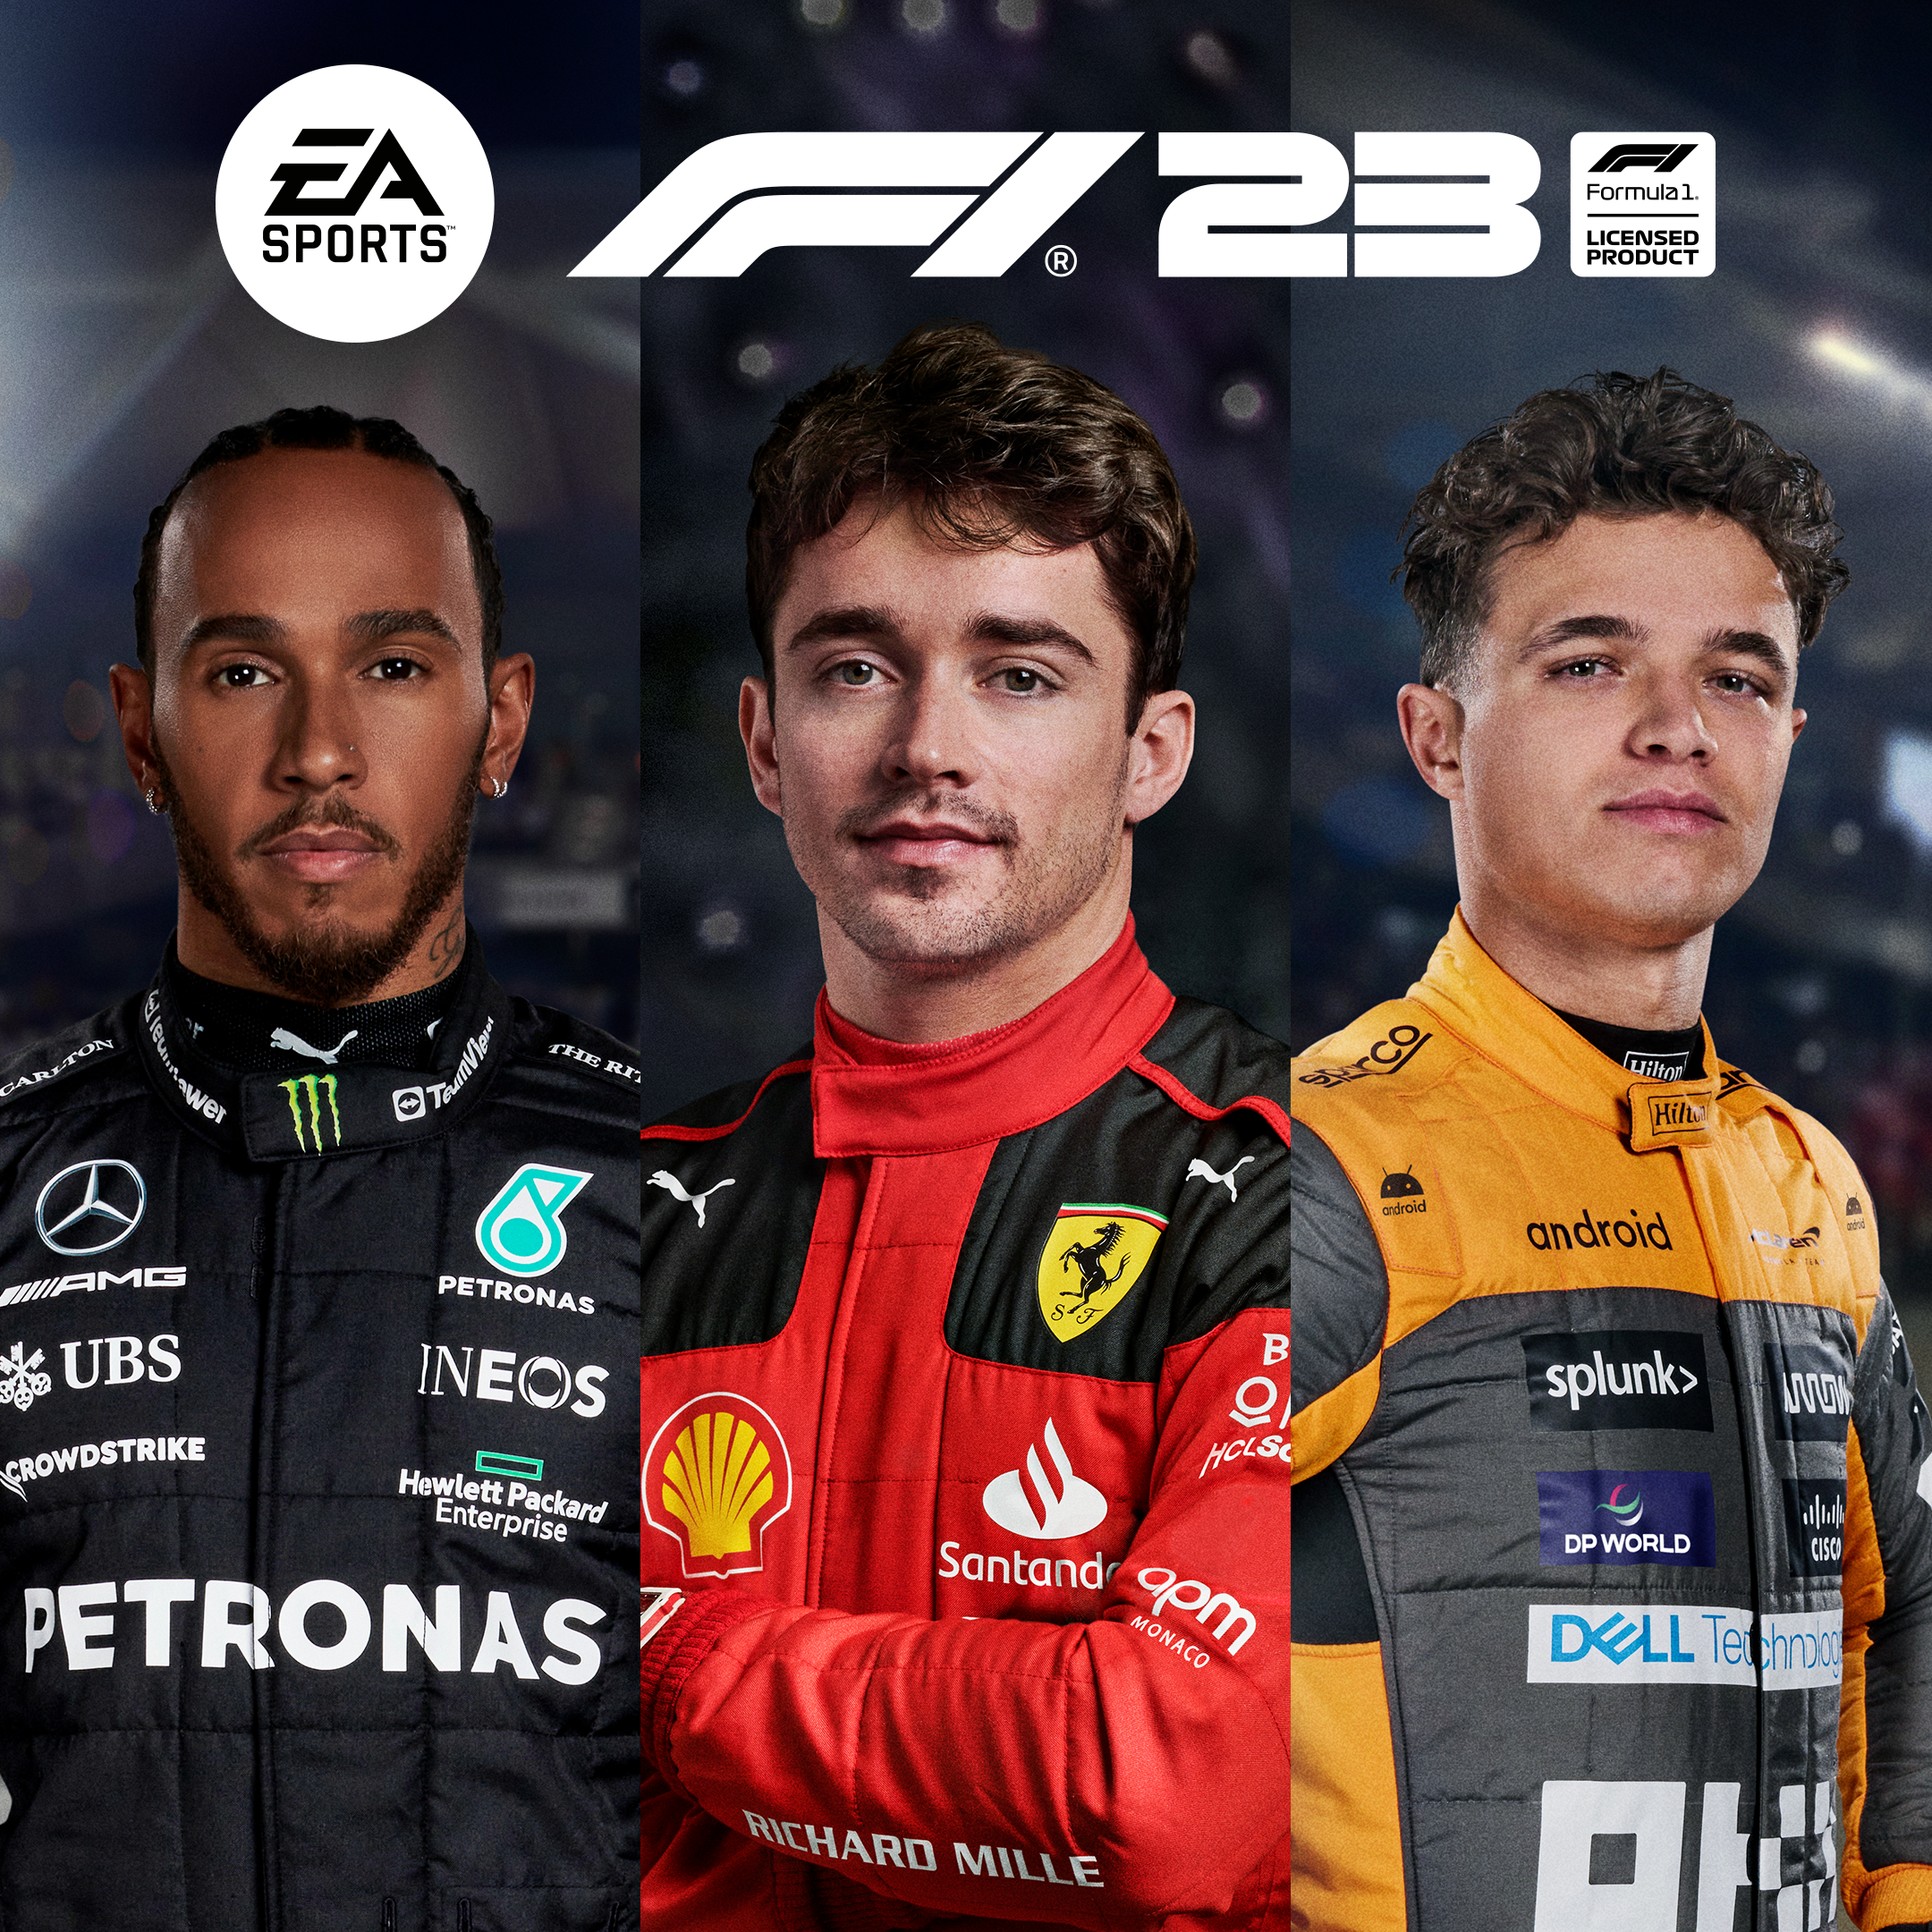 F1 23 presents its stars for the cover